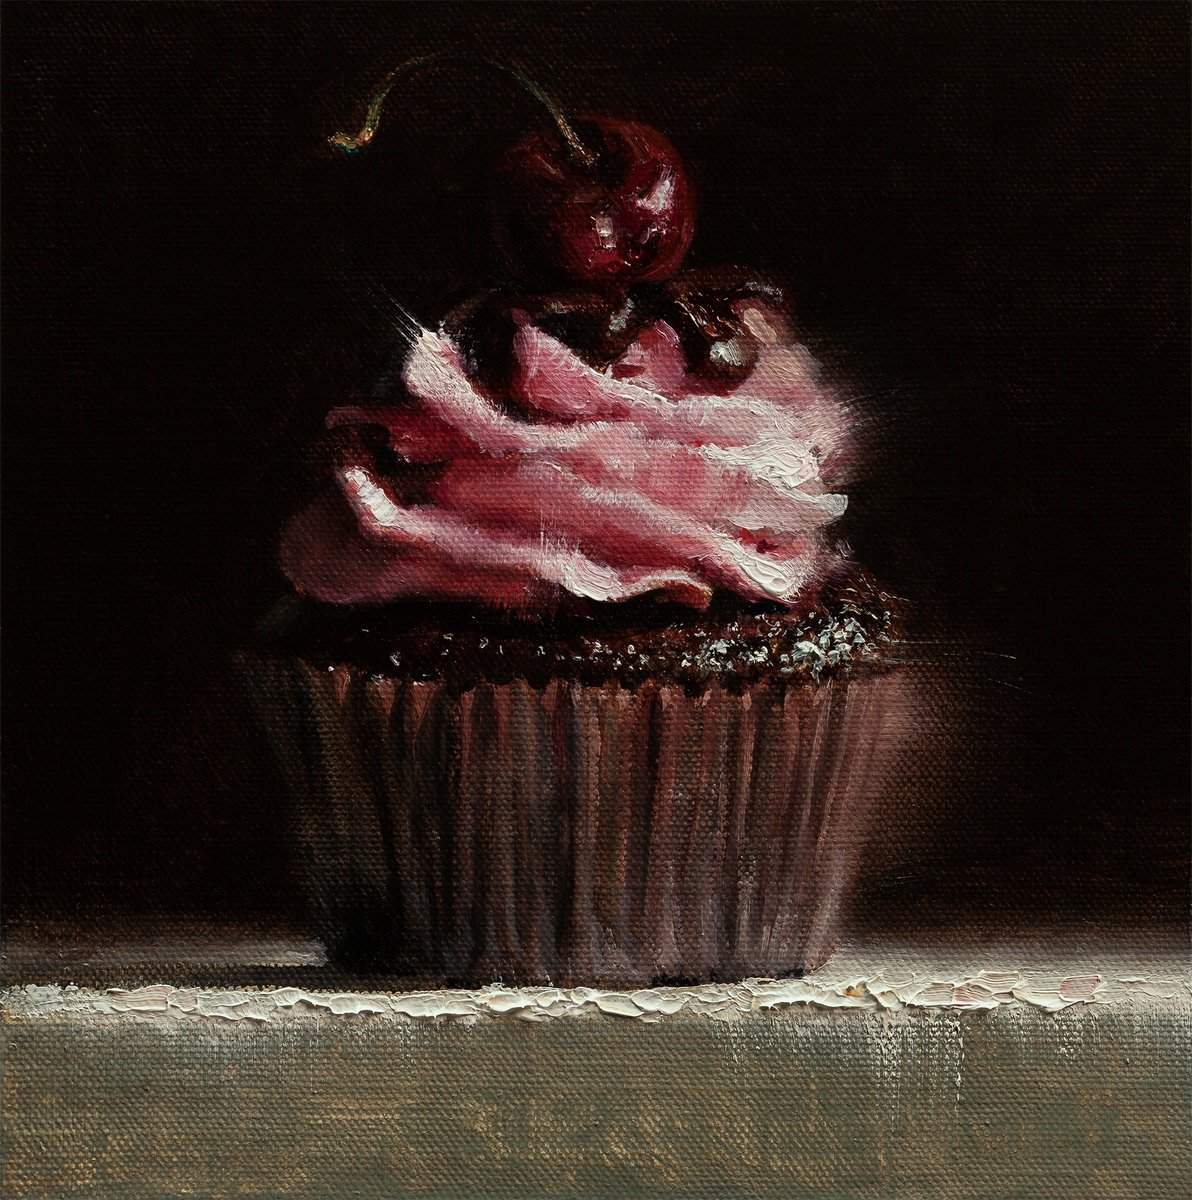 Cupcake by Tom Off